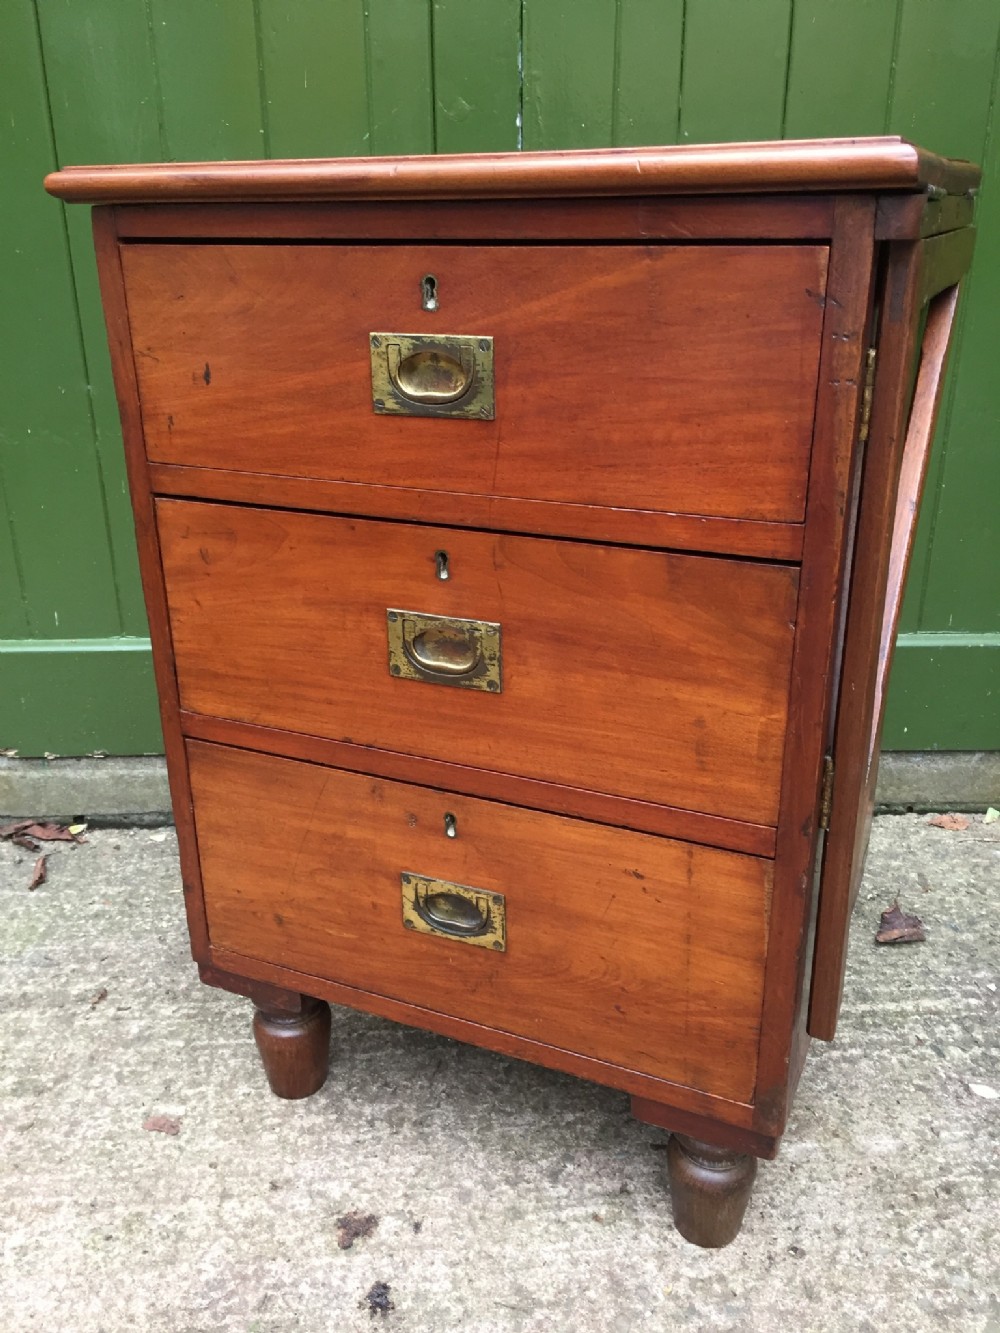 c19th mahogany military or naval campaign pedestal chest of drawers with a foldover flap top